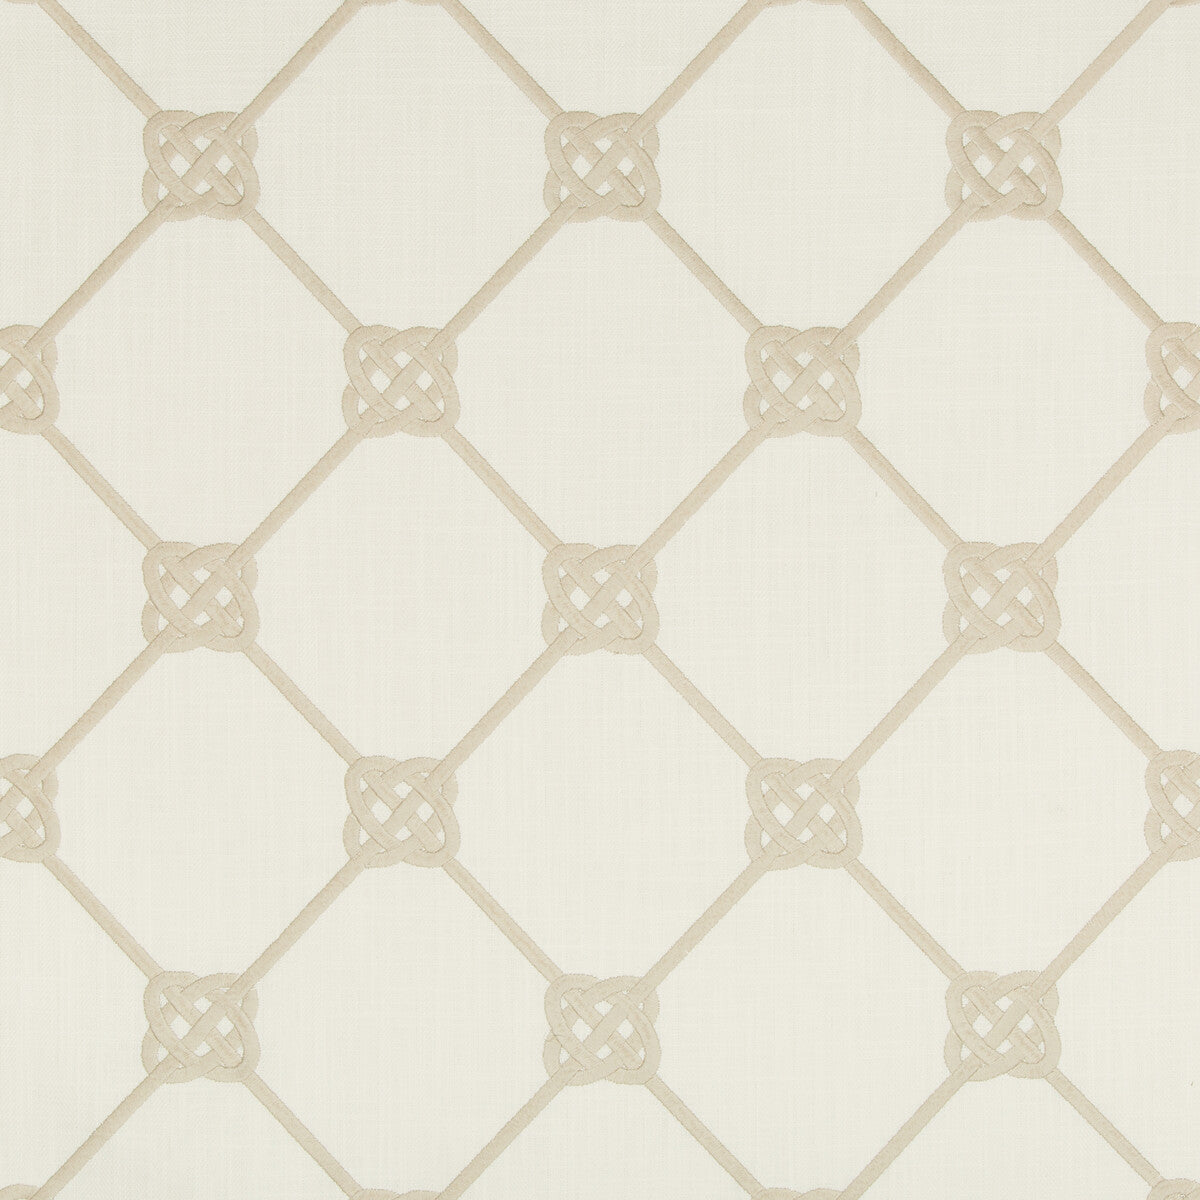 Knotbridge fabric in natural color - pattern 35540.16.0 - by Kravet Basics in the Bermuda collection